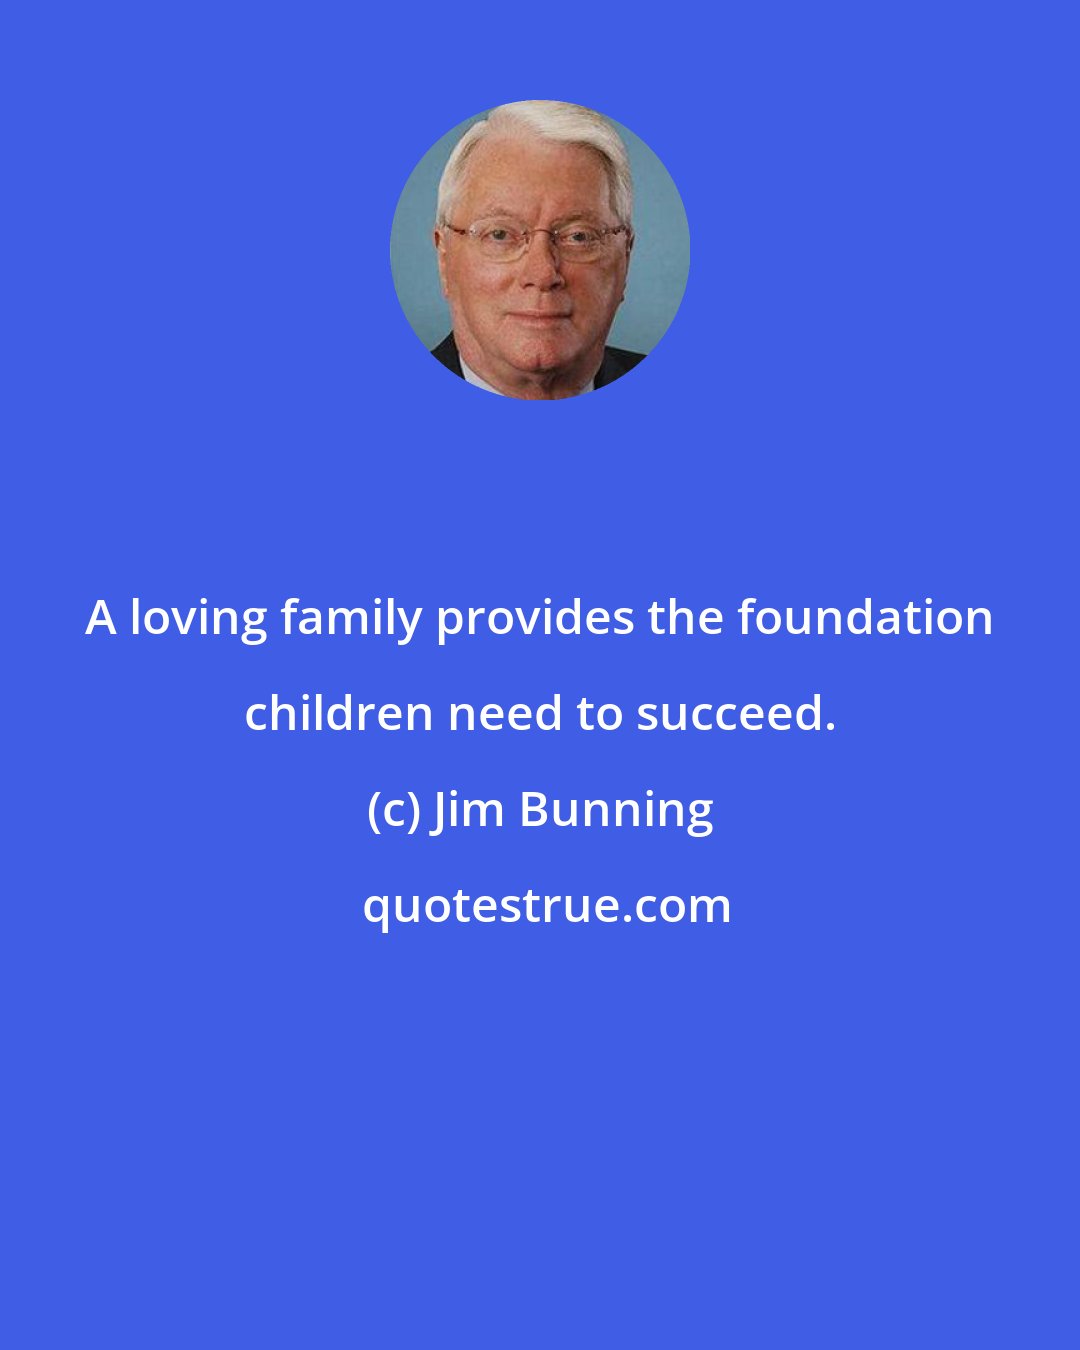 Jim Bunning: A loving family provides the foundation children need to succeed.